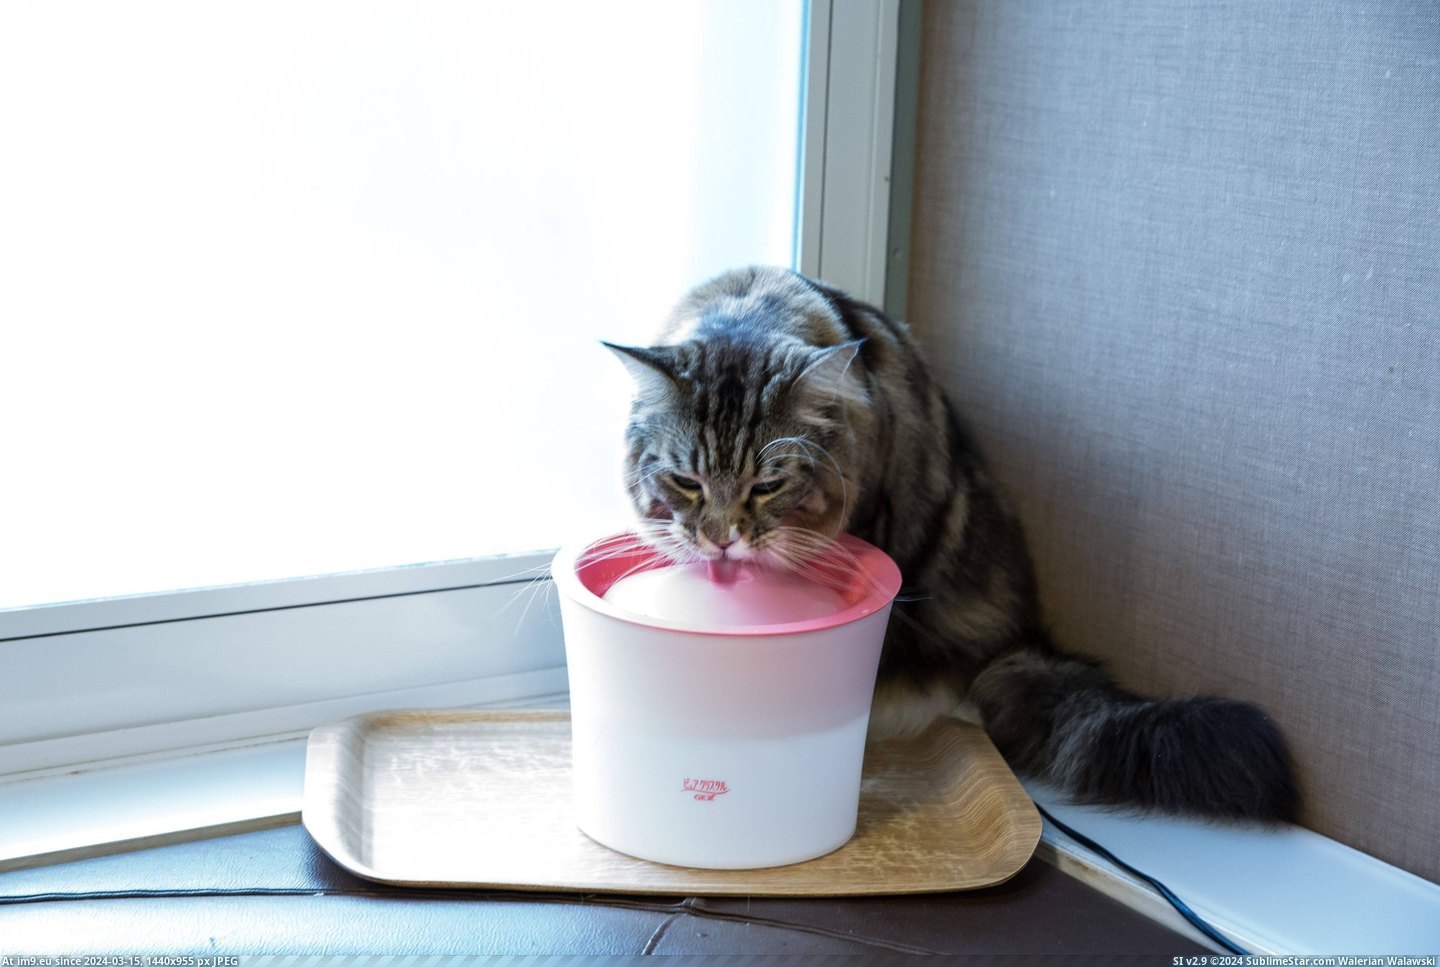 #Cats #Cat #Visited #Tokyo #Cafe [Cats] I visited a cat cafe in Tokyo... 17 Pic. (Bild von album My r/CATS favs))